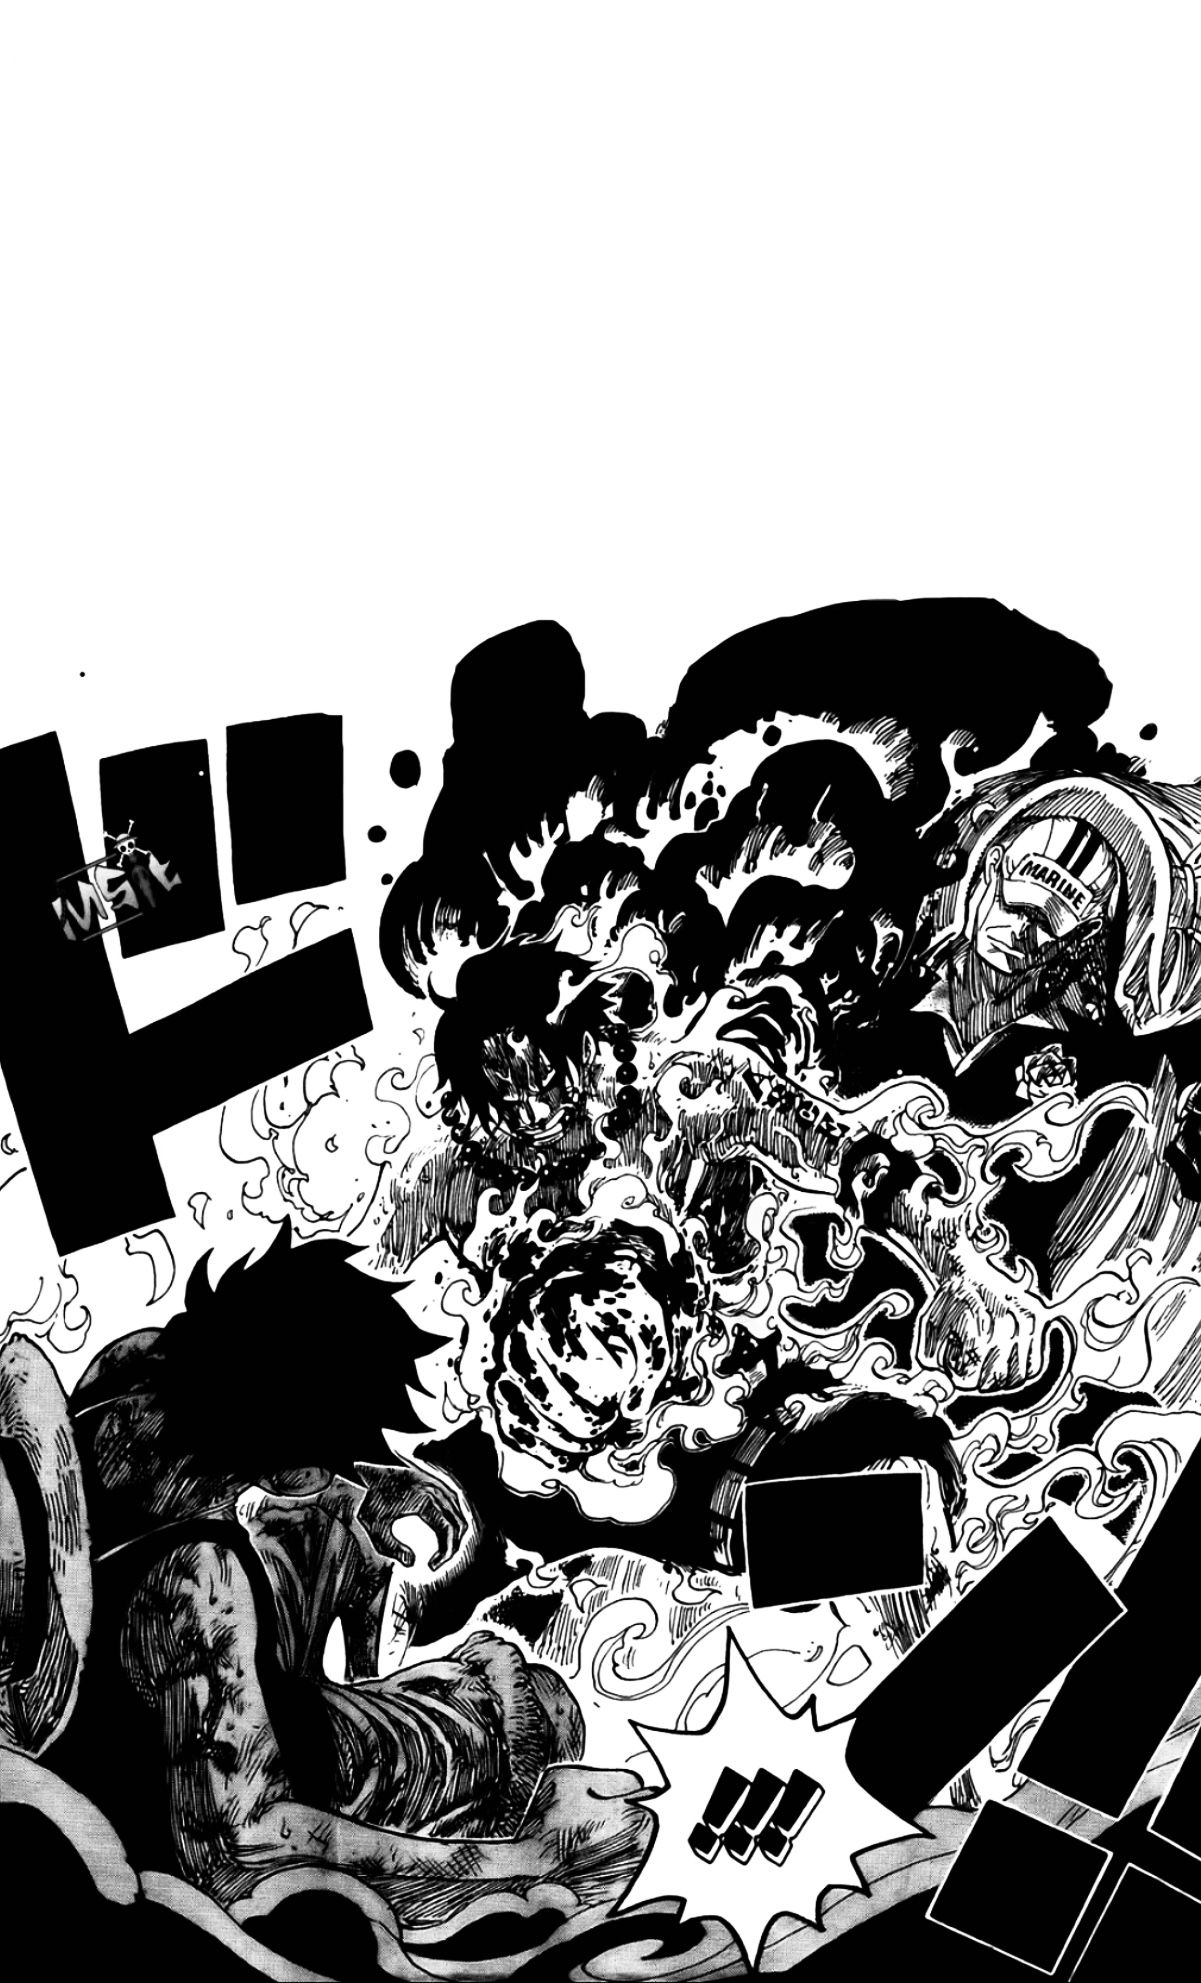 One piece Ace. One piece drawing, One piece wallpaper iphone, One piece comic